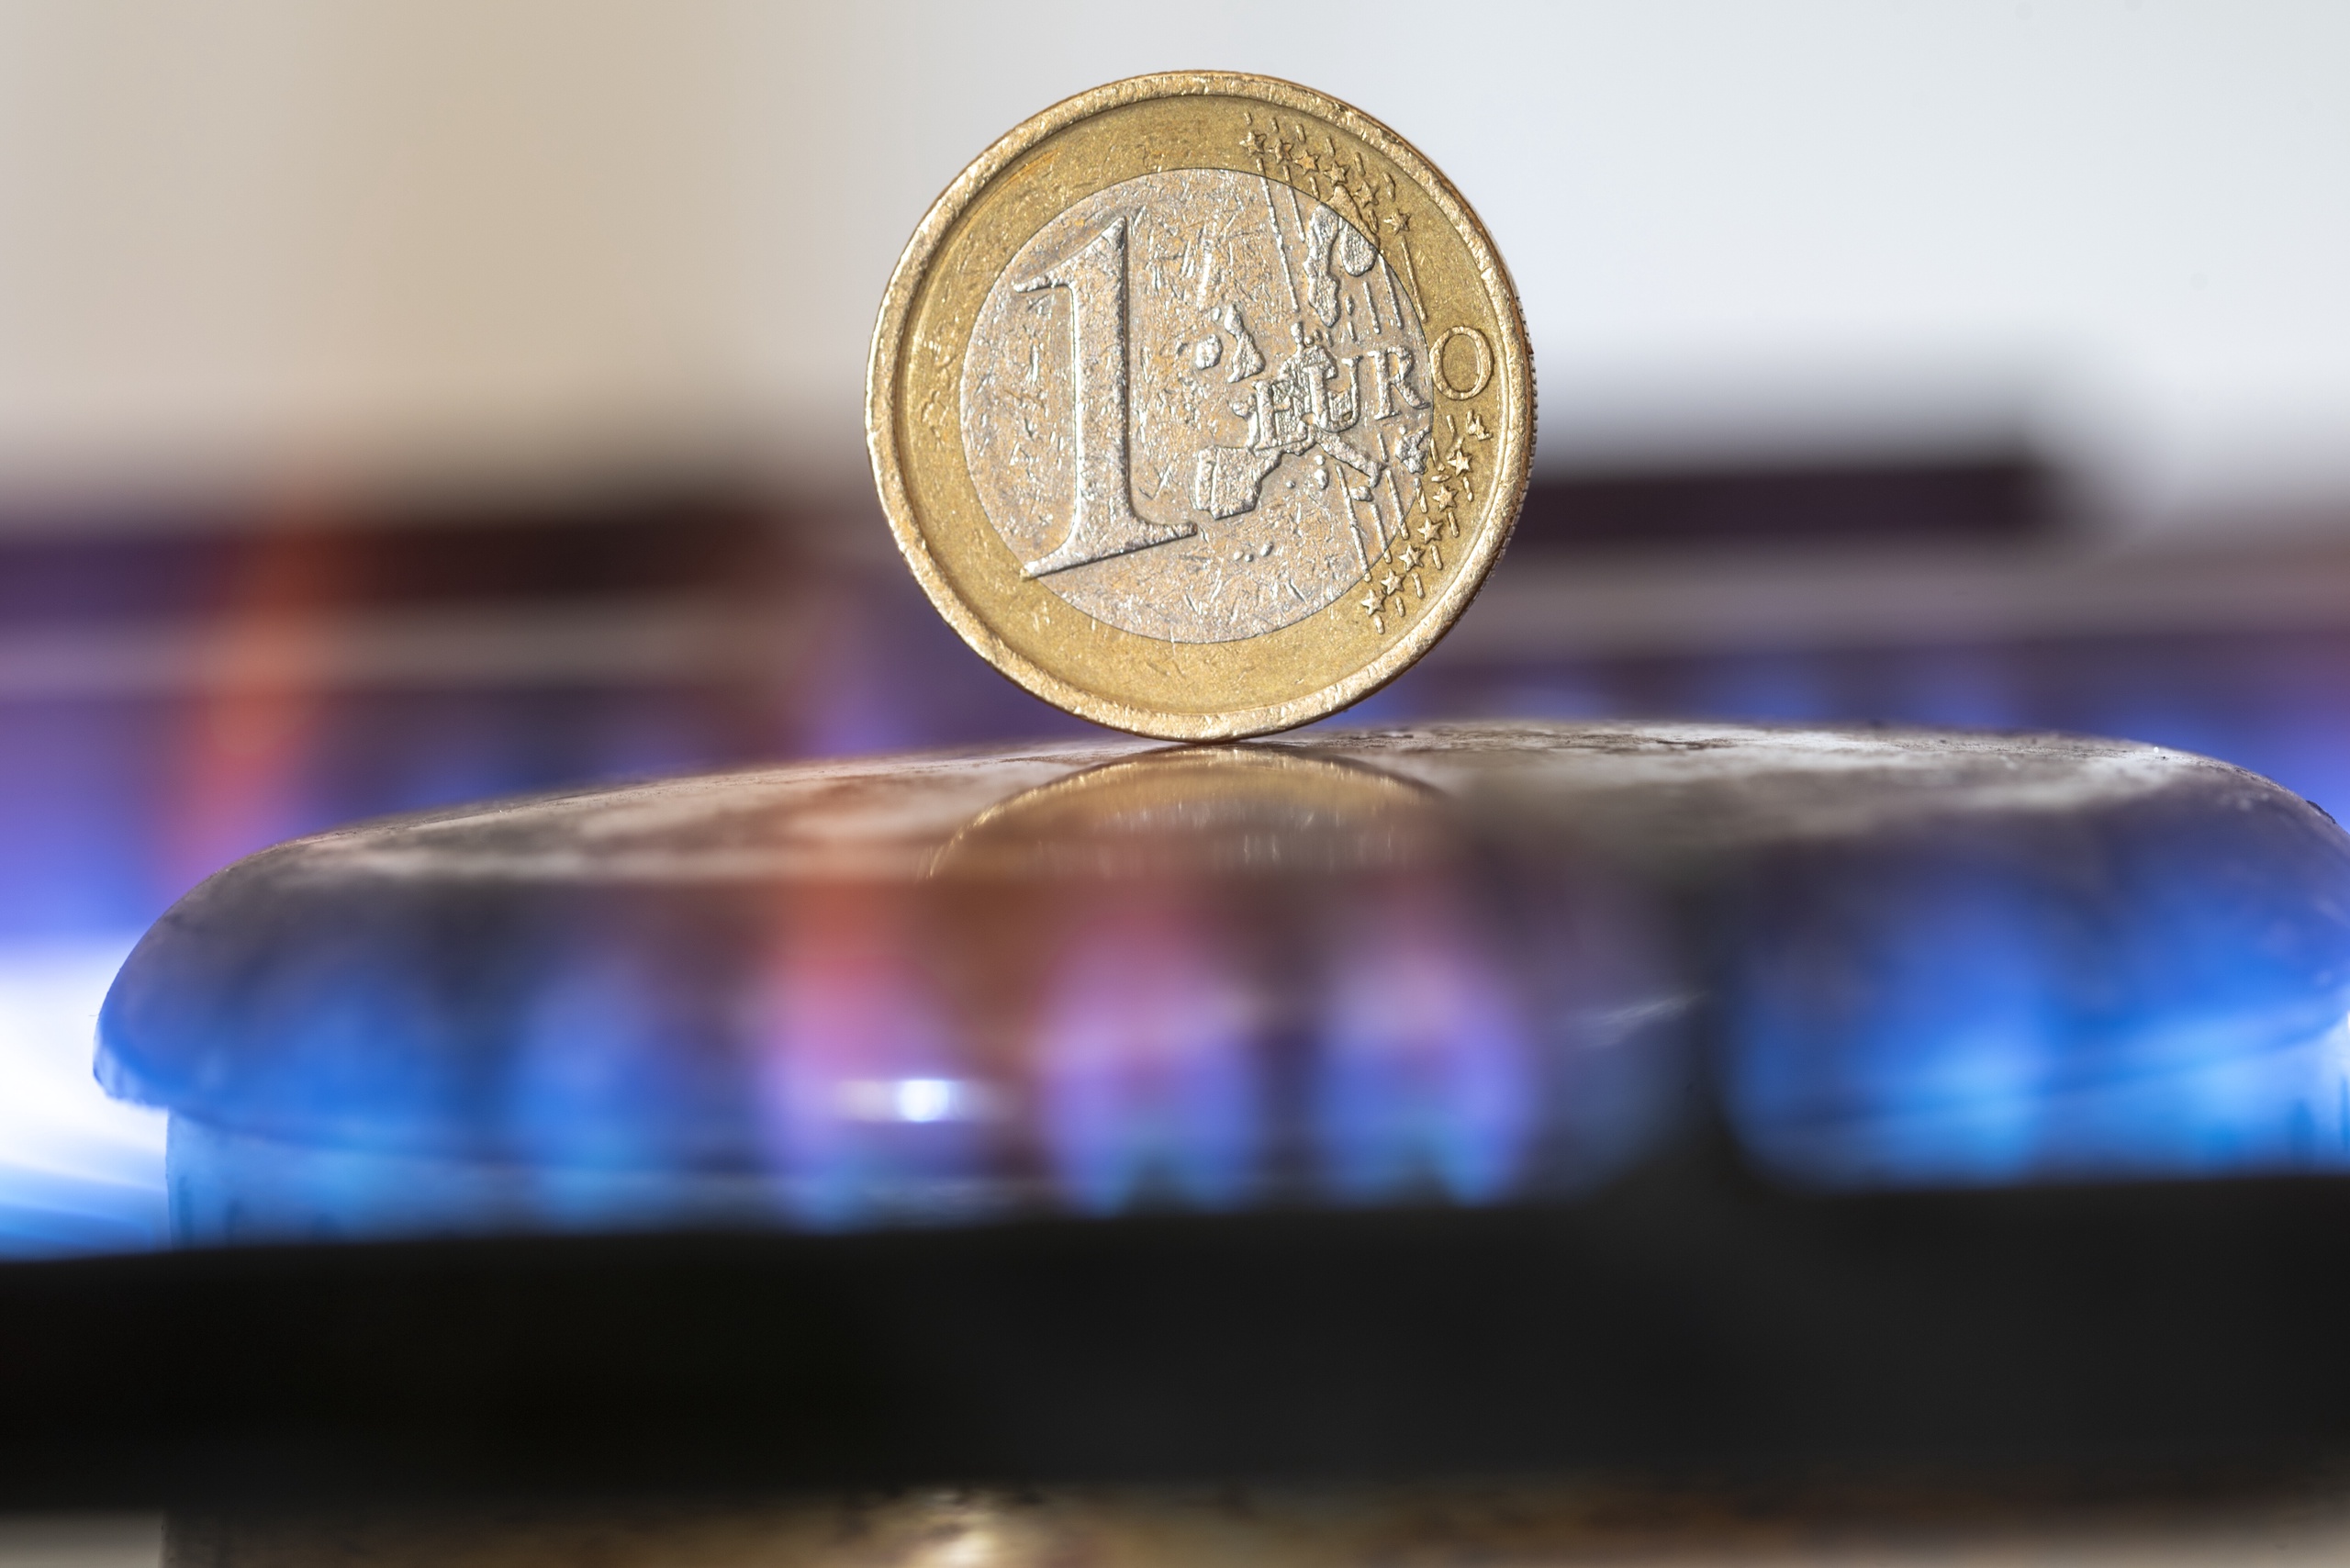 The European gas price has fallen to the lowest level in almost two years.  The price of a megawatt hour of gas fell by almost nine percent to 25.35 euros yesterday, but we are not completely out of the woods yet, thinks energy expert Jilles van den Beukel of the The Hague Center for Strategic Studies.